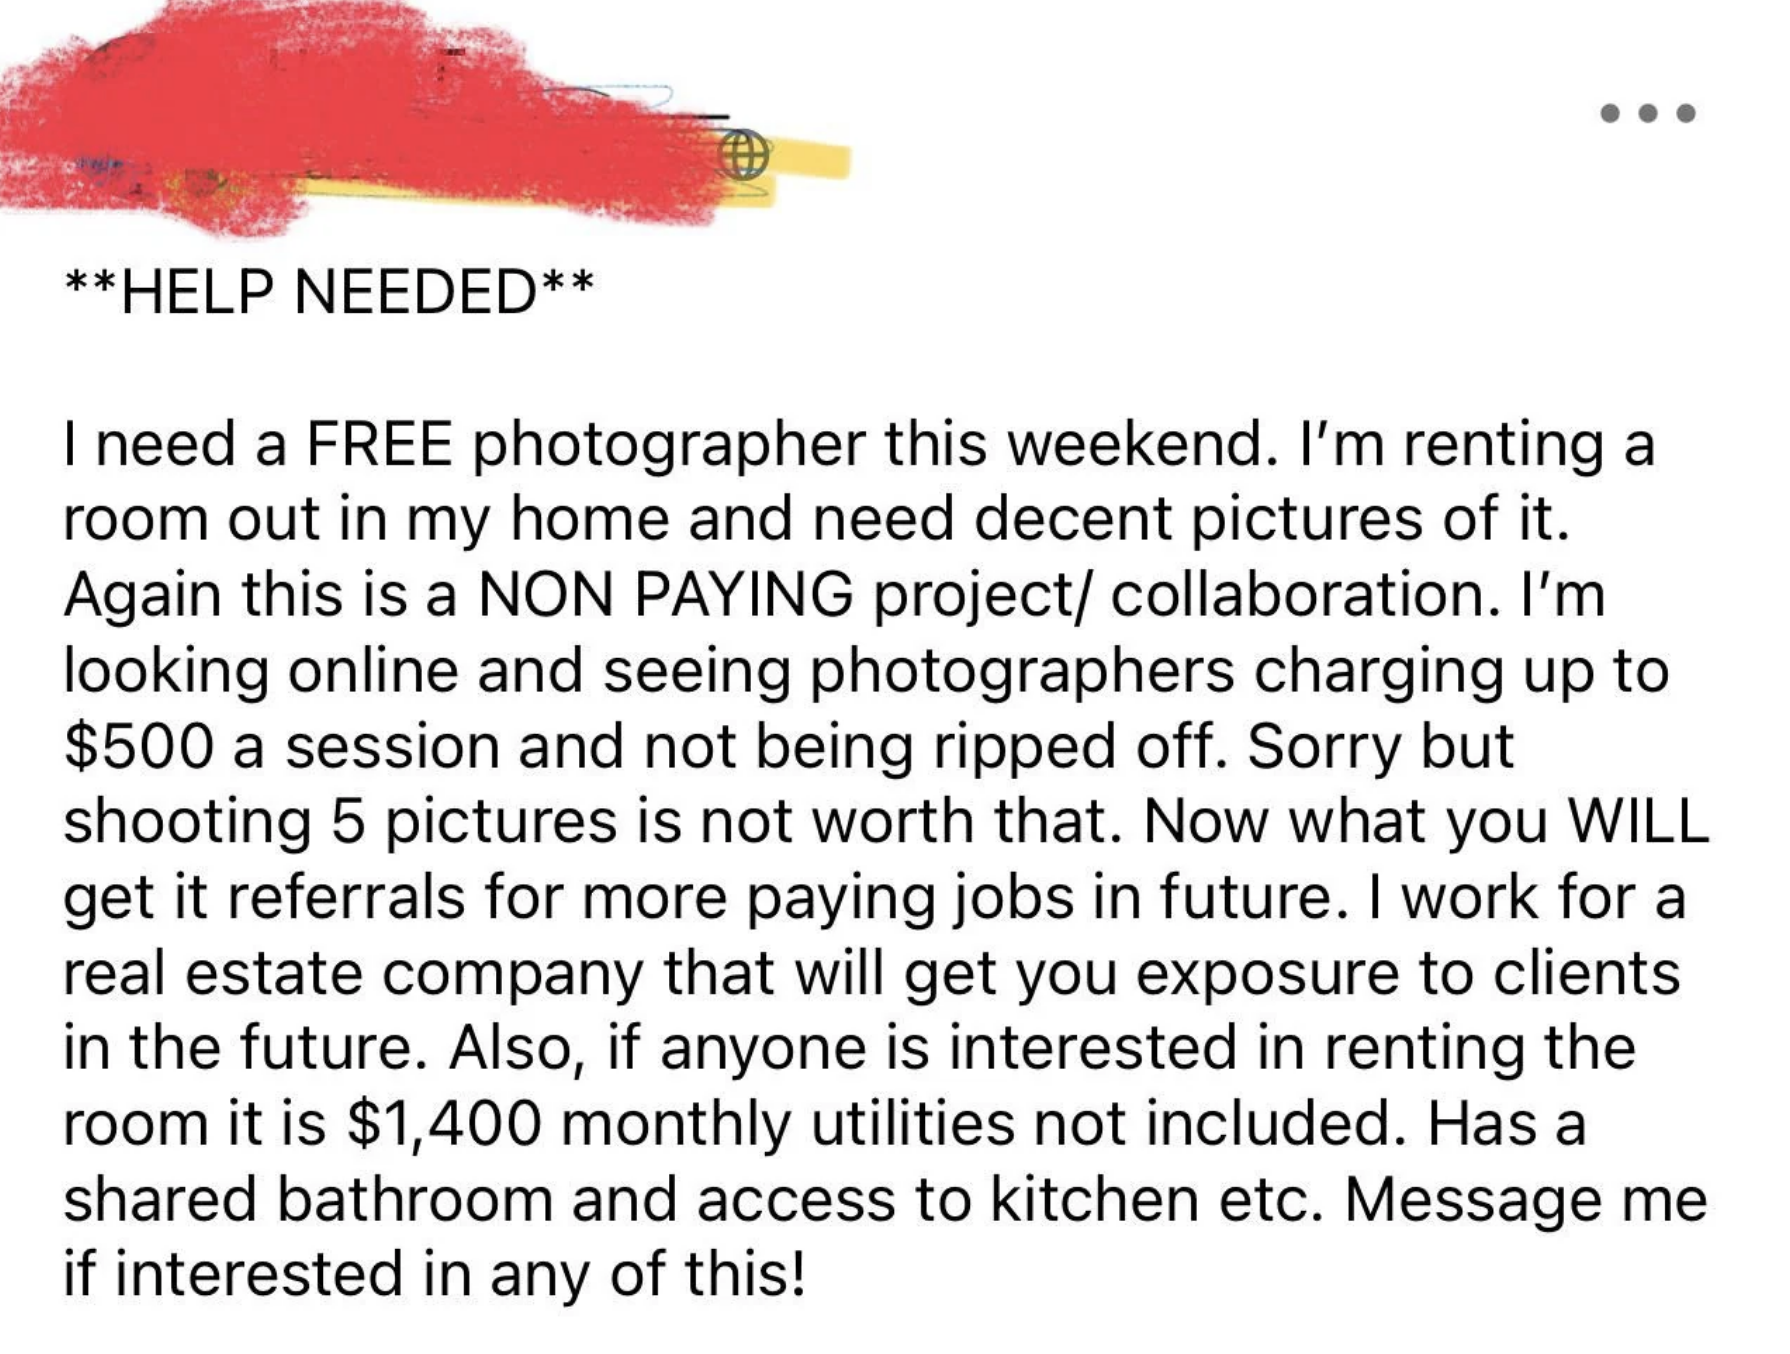 Person needs a free photographer to take pics of room they&#x27;re renting out; in return they&#x27;ll get referrals and exposure from — and also, they&#x27;re renting the room with shared bathroom and kitchen access for $1,400, utilities not included